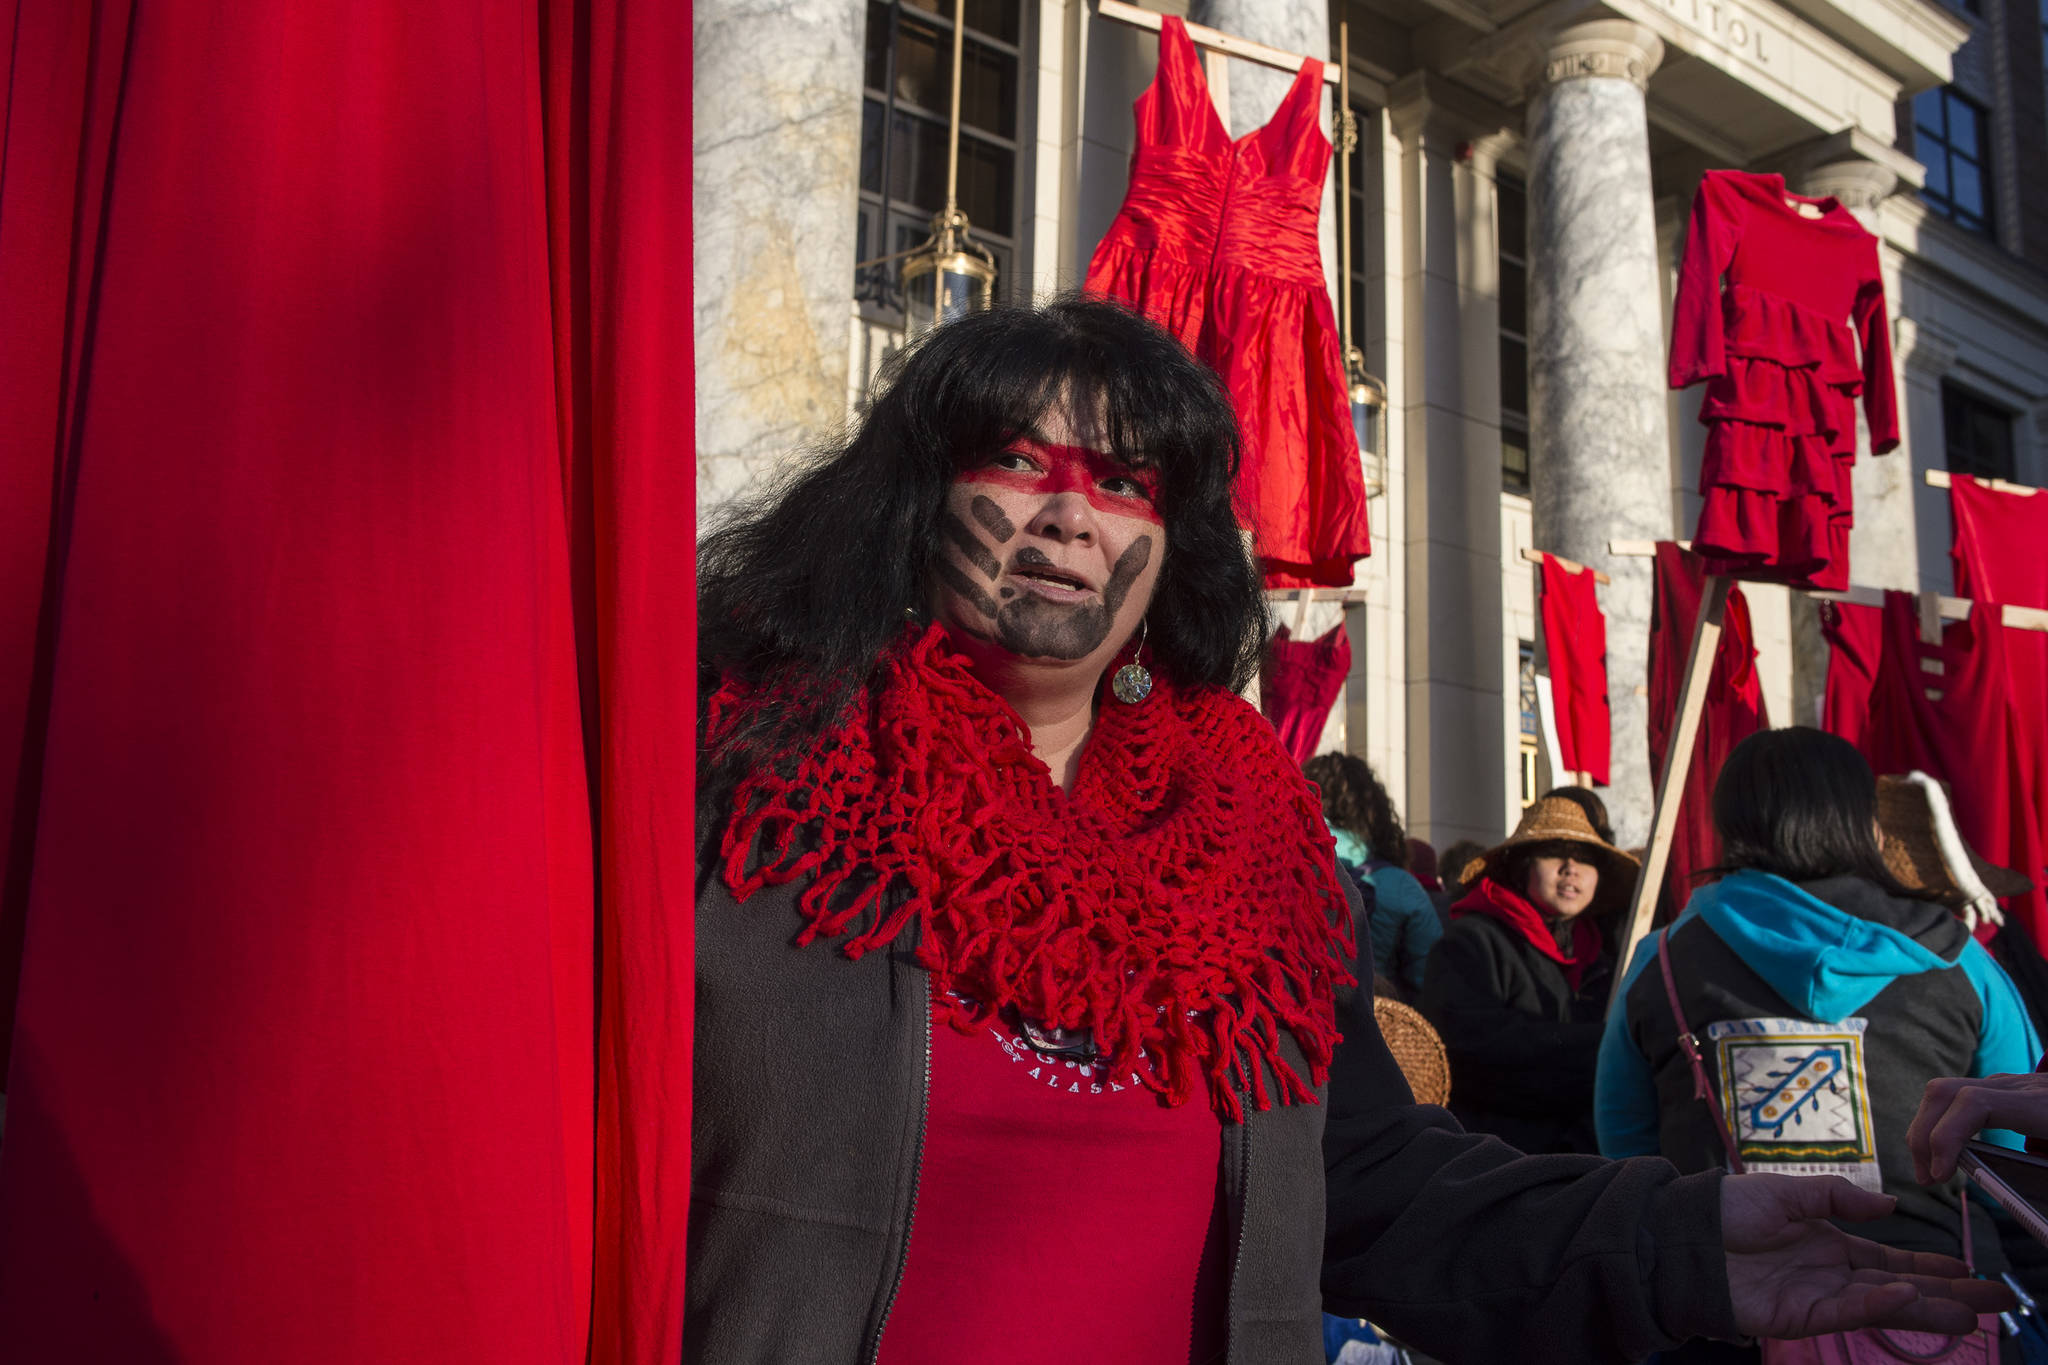 Susan Brouillette attends with Native women holding up red dresses to symbolize missing and murdered indigenous women during the Women’s March on Juneau in front of the Alaska State Capitol on Saturday, Jan. 19, 2019. (Michael Penn | Juneau Empire)